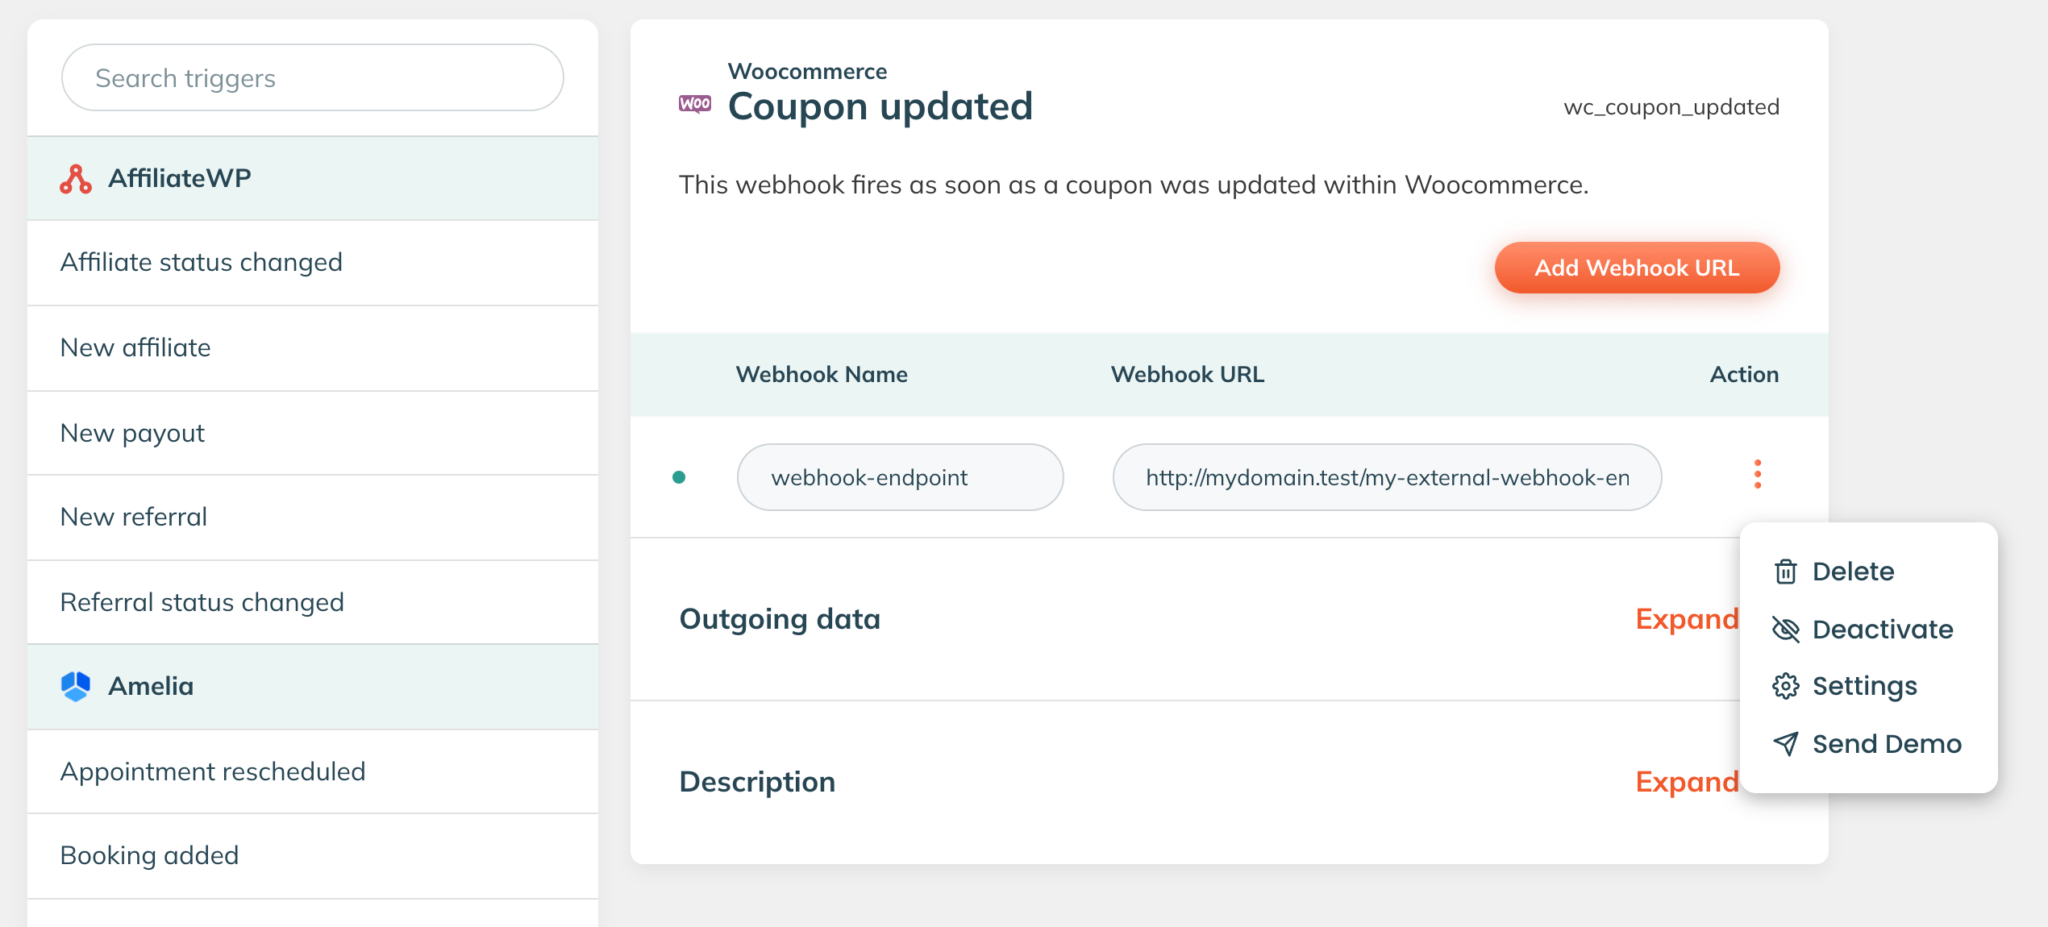 The WP Webhooks screen of the Topic favored trigger